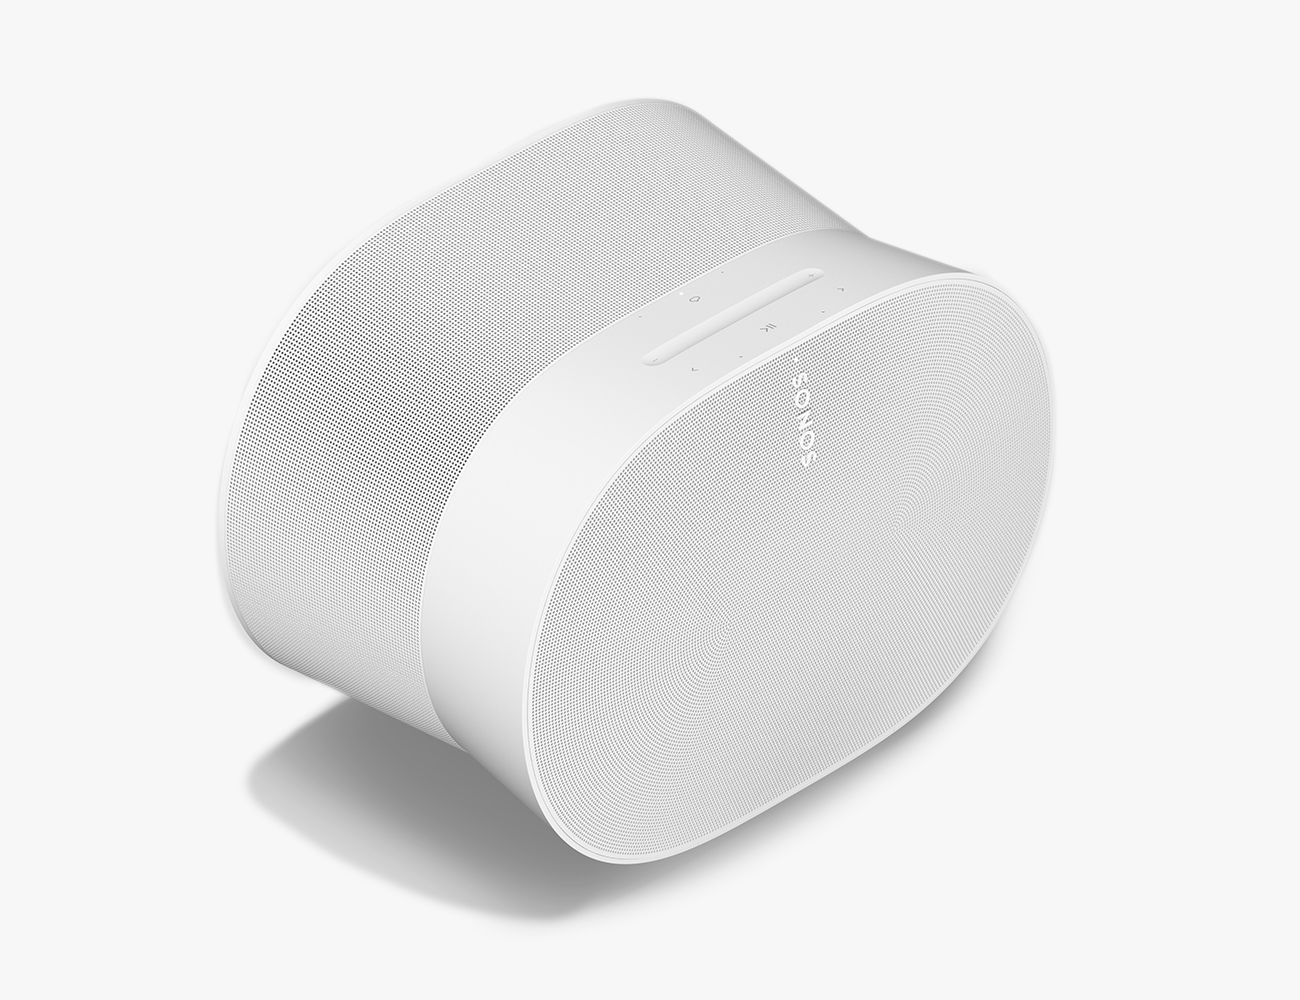 How to Save on Sonos Speakers With the Program